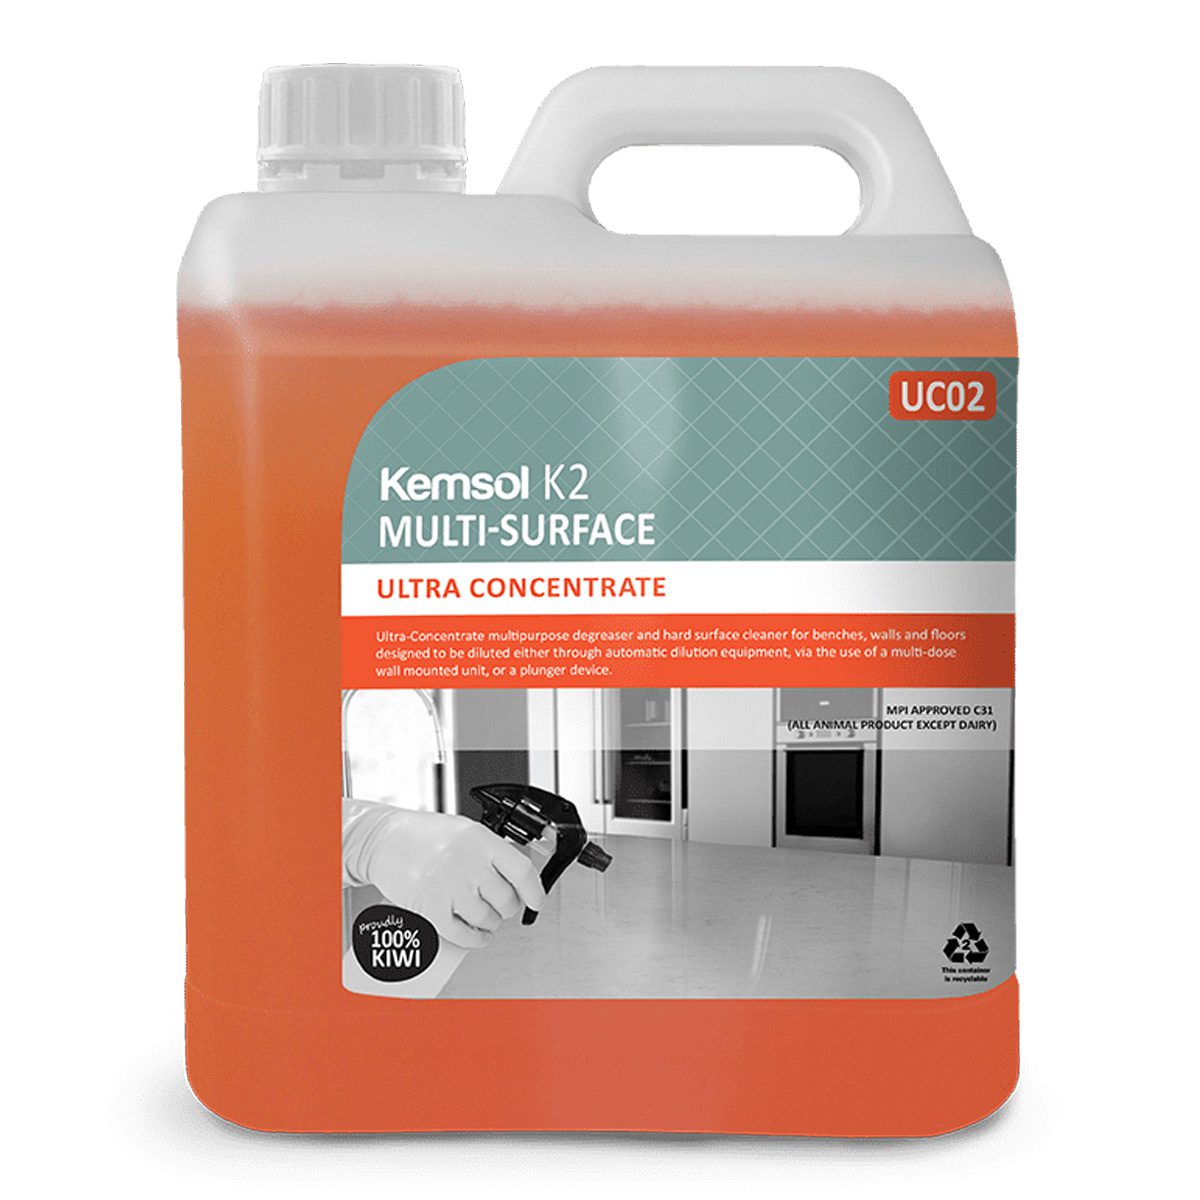 cleaning-products-kitchen-multipurpose-kemsol-K2-u/c-multipurpose-spray-and-wipe-2L-litre-ultra-concentrate-multipurpose-degreaser-hard-surface-cleaner-benches-walls-floors-vjs-distributors-KK2